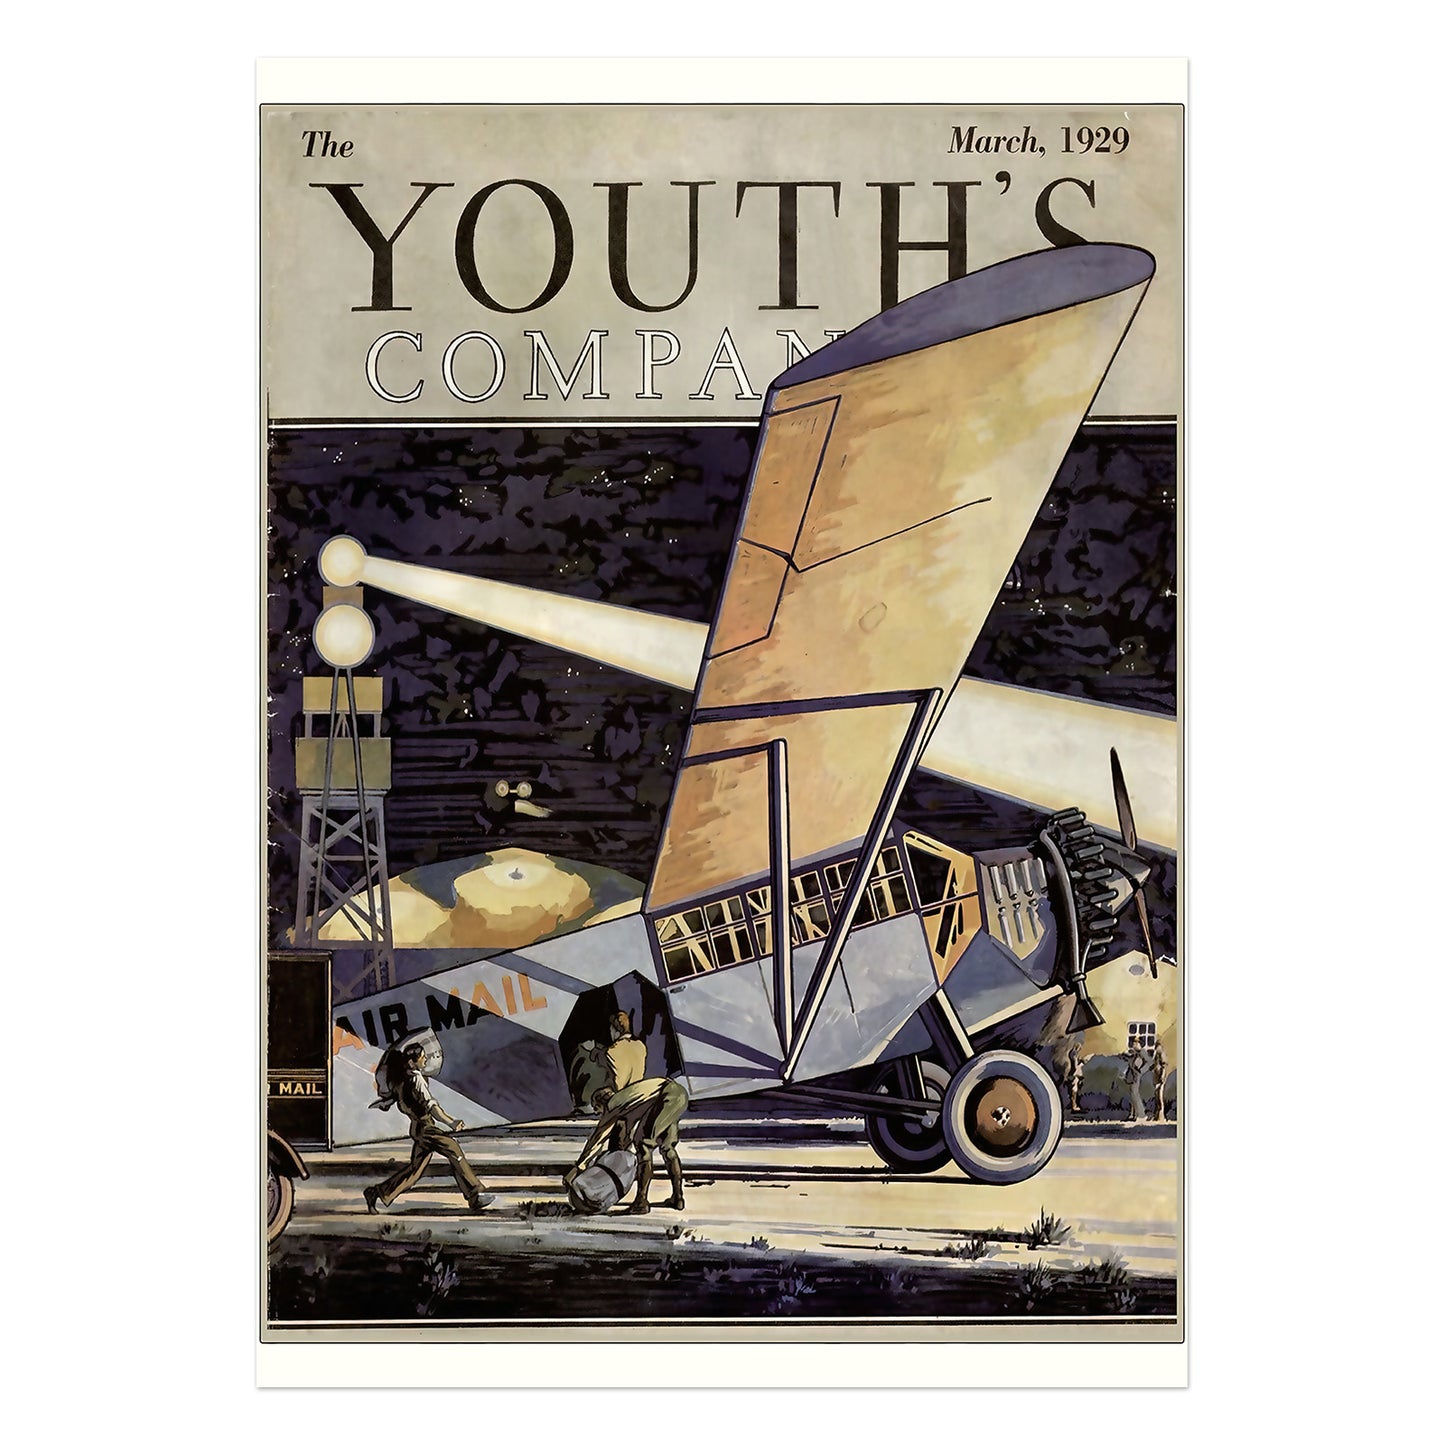 Youth's Companion Magazine front cover, March 1929